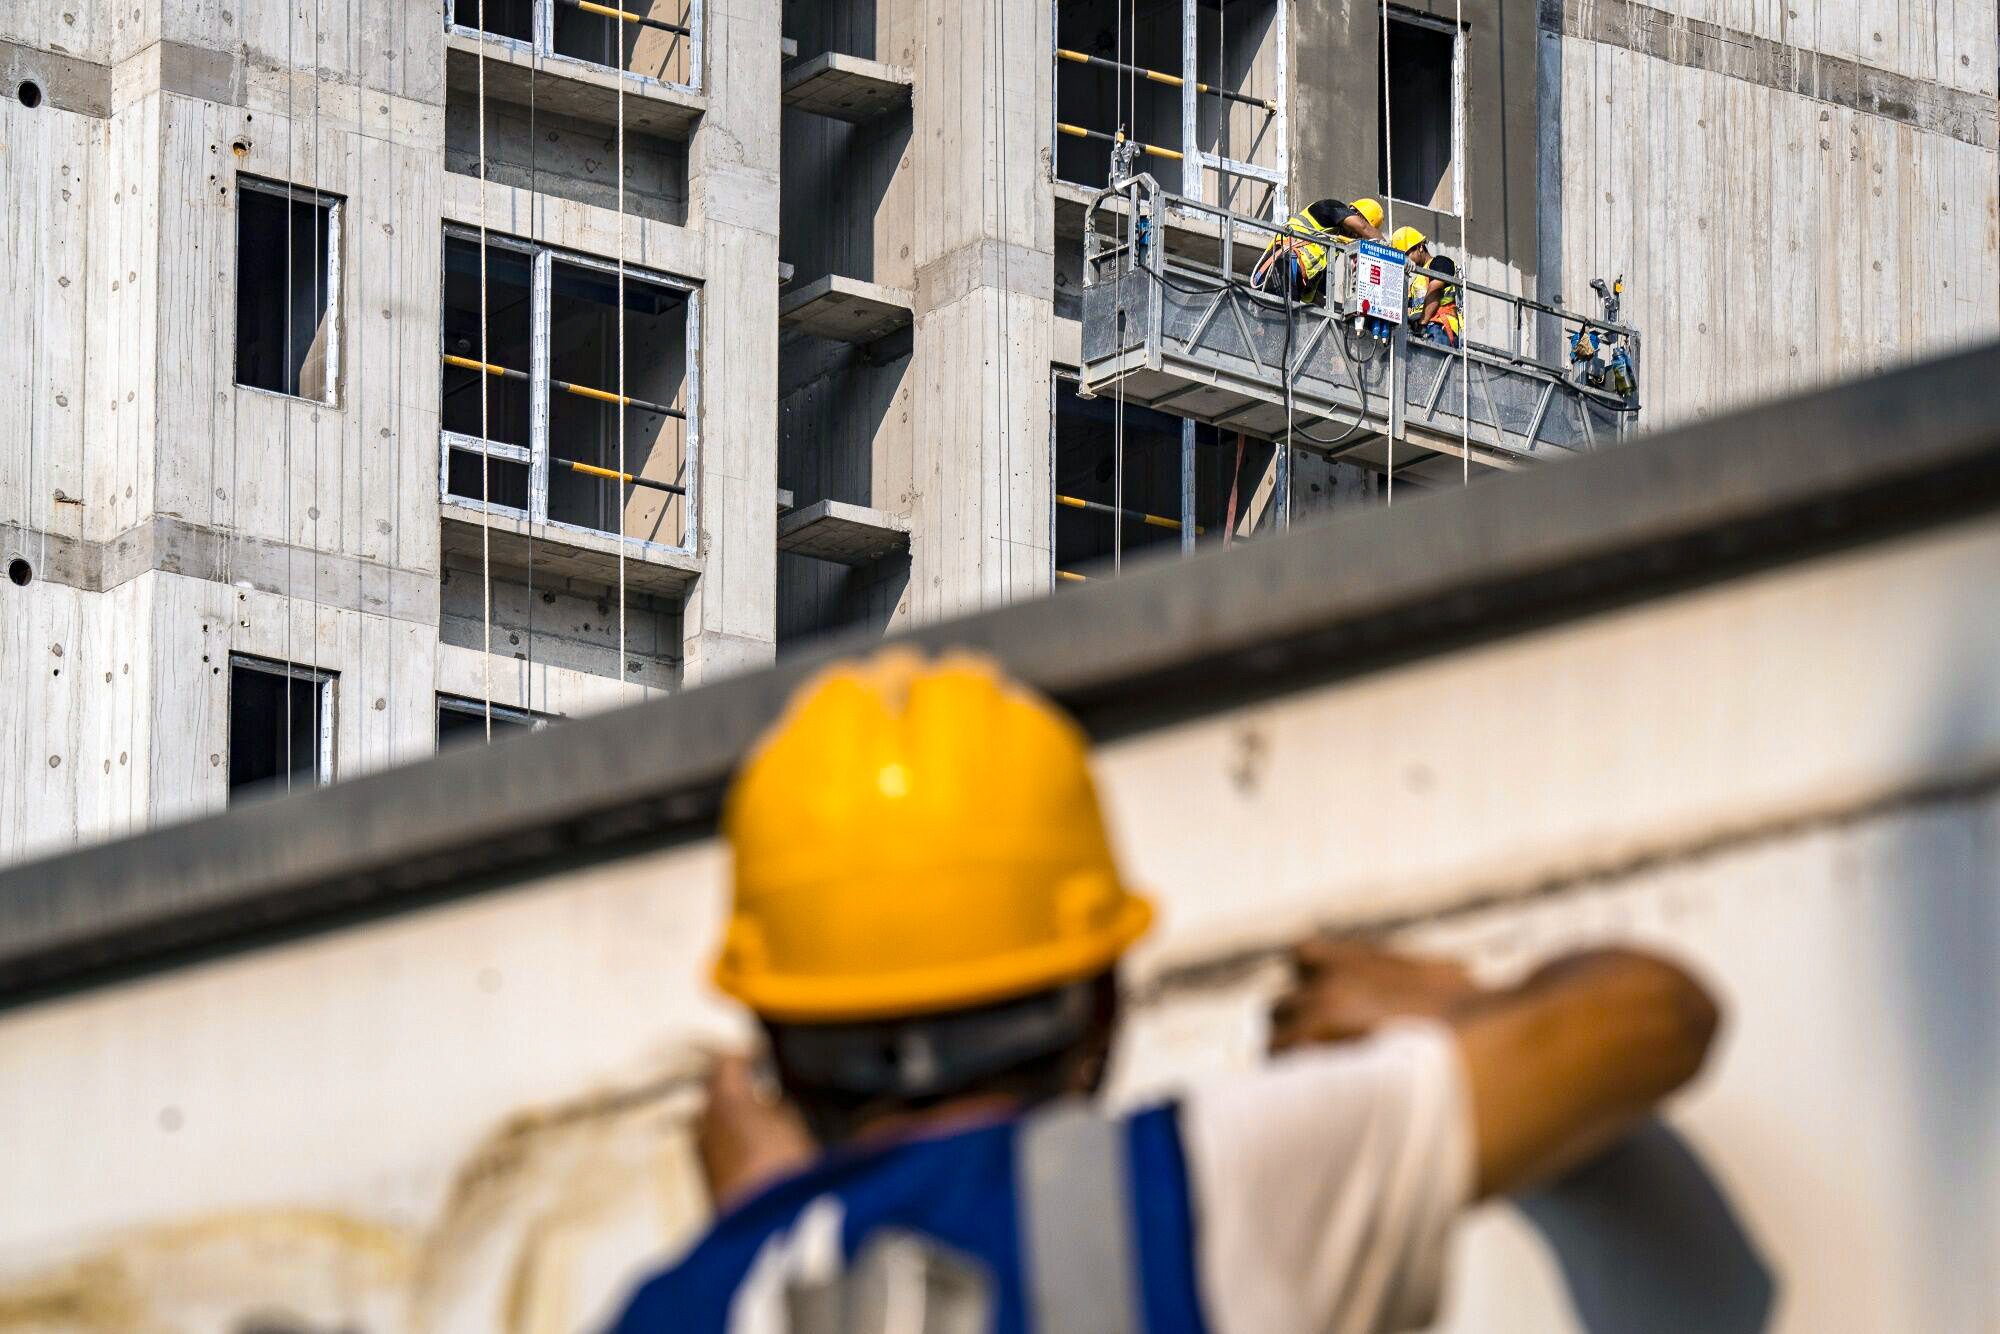 An underconstruction residential building in Shenzhen. About 64 per cent of respondents said they expected to grow their holdings in real estate over the medium term, State Street says. Photo: Bloomberg